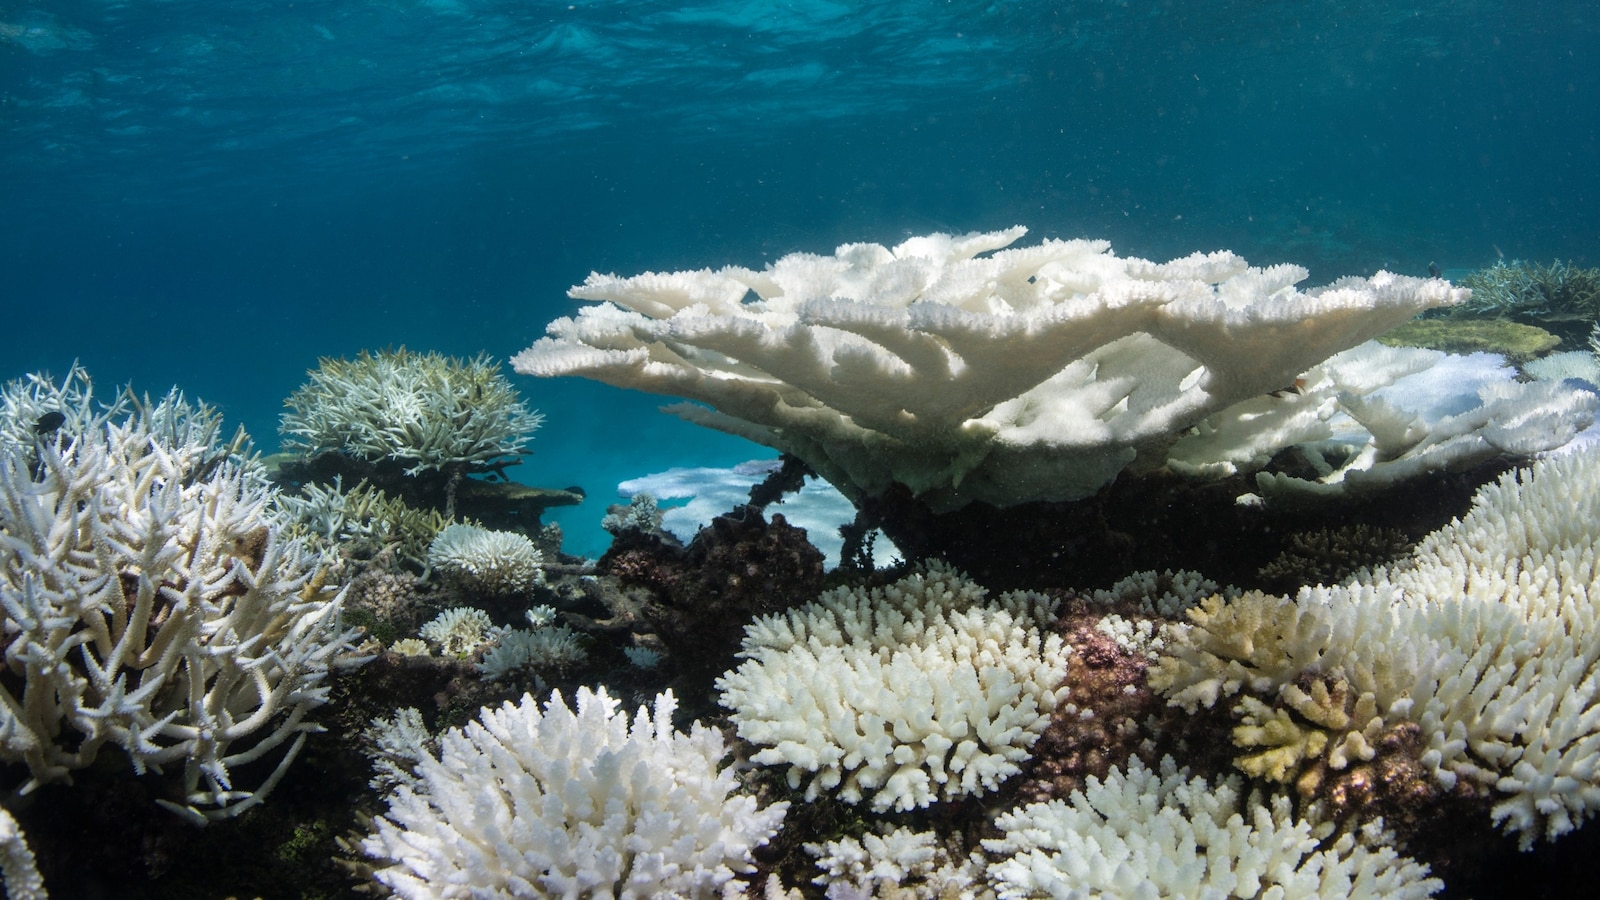 4th global coral reef bleaching event underway as oceans continue to warm: NOAA [Video]